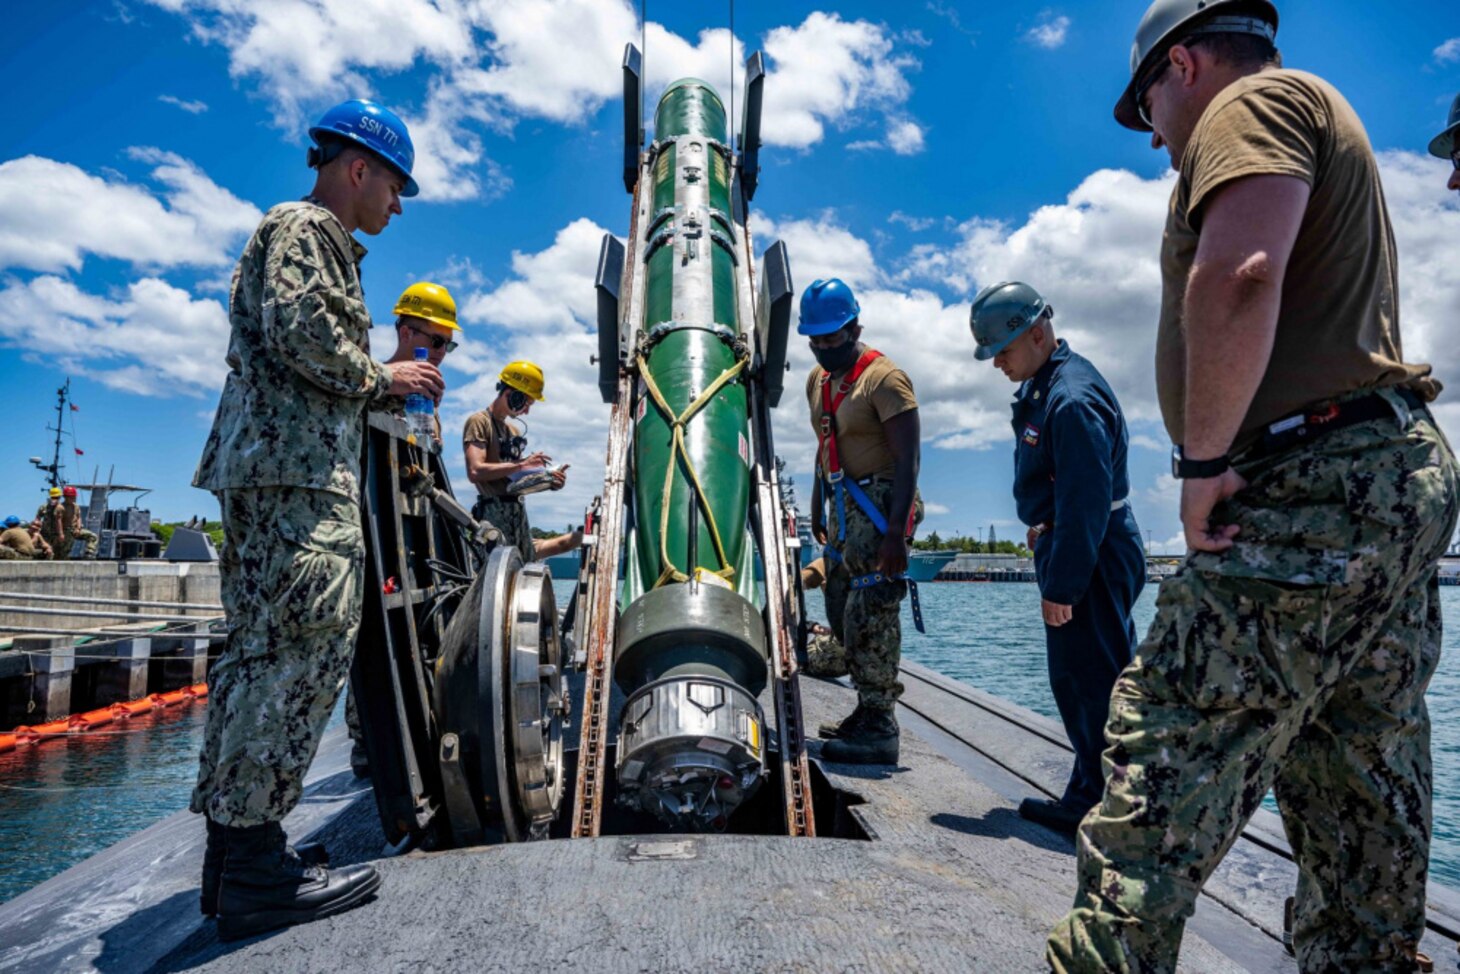 JOINT BASE PEARL HARBOR-HICKAM (June 2, 2021) -- Sailors assigned to the Los Angeles-class fast-attack submarine USS Columbia (SSN 771) load a Mark 48 advanced capability torpedo for Exercise Agile Dagger 2021 (AD21). AD21 is a training exercise, with one-third of the Pacific Submarine Force getting underway, to assess warfighting readiness and build capacity for the joint force. (U.S. Navy photo by Mass Communication Specialist 1st Class Michael B. Zingaro/Released)